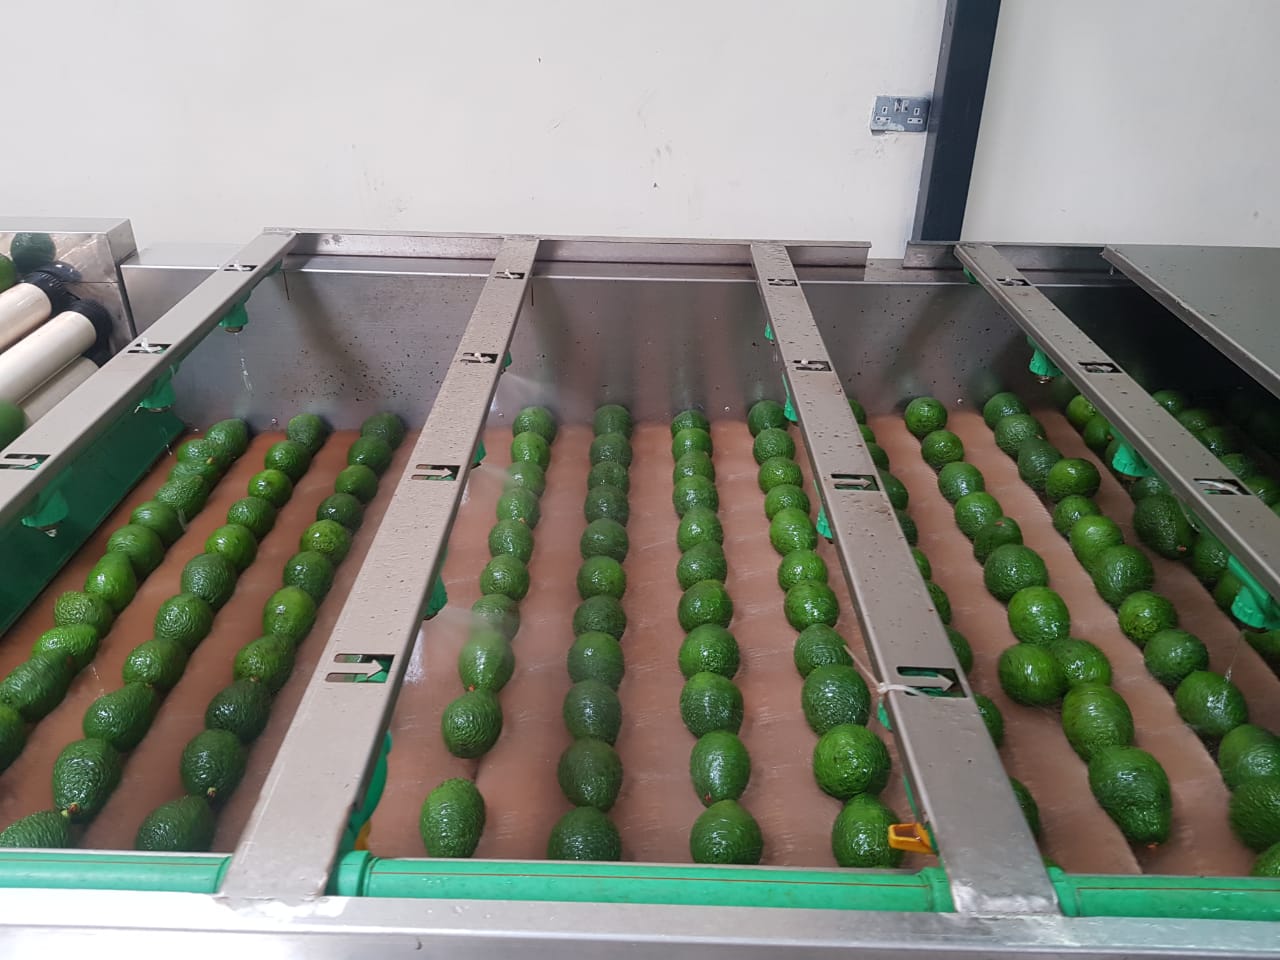 Hass avocadoes being cleaned by BFI and Barke Enterprises Kenya - Beva Fruits International (BFI)